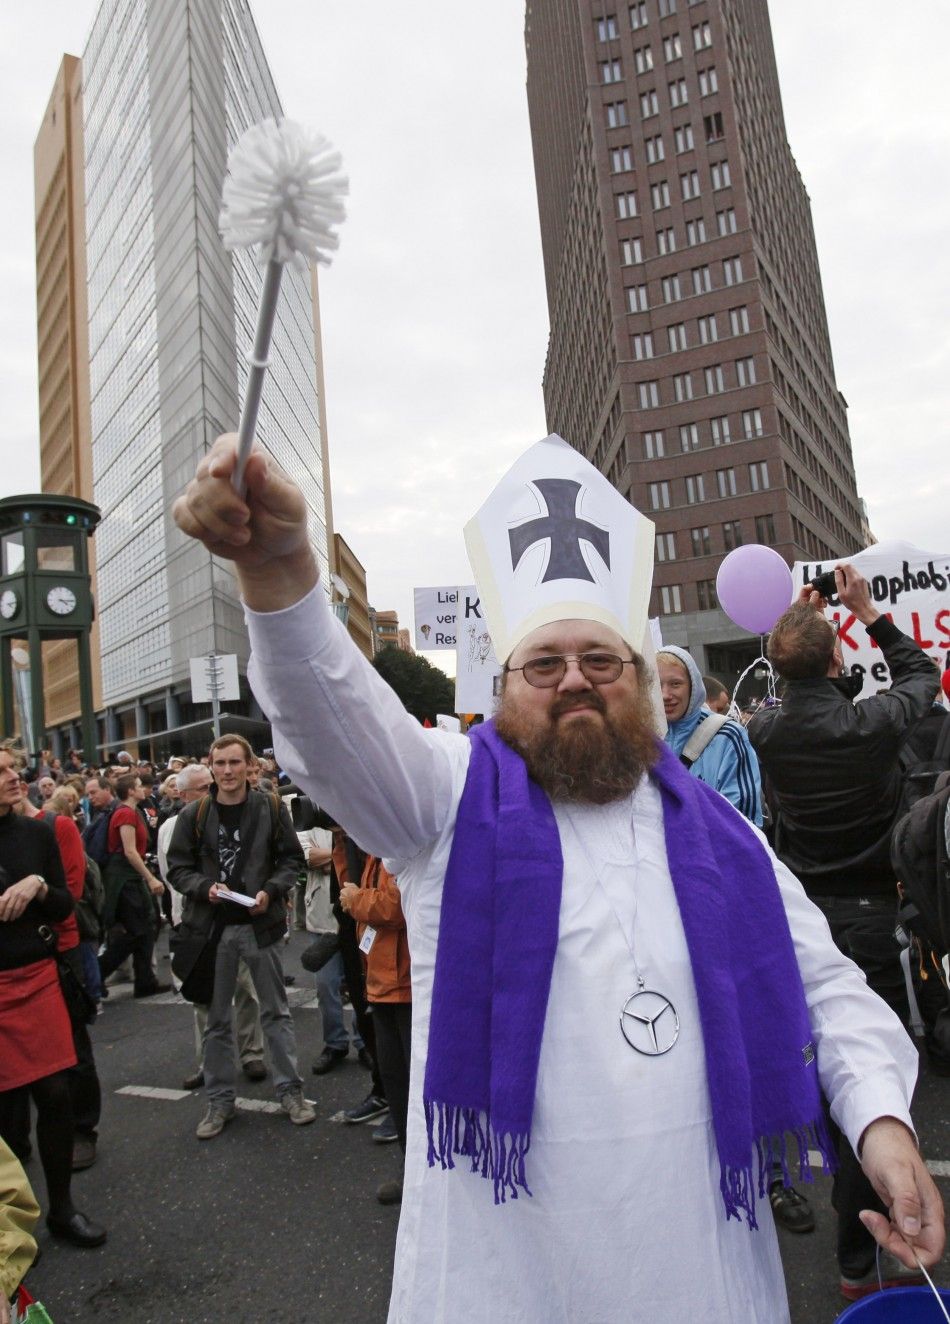 A demonstrator opposing the visit of Pope Benedict XVI waves a toilet bowl brush during a protest at Potsdamer Platz in Berlin 